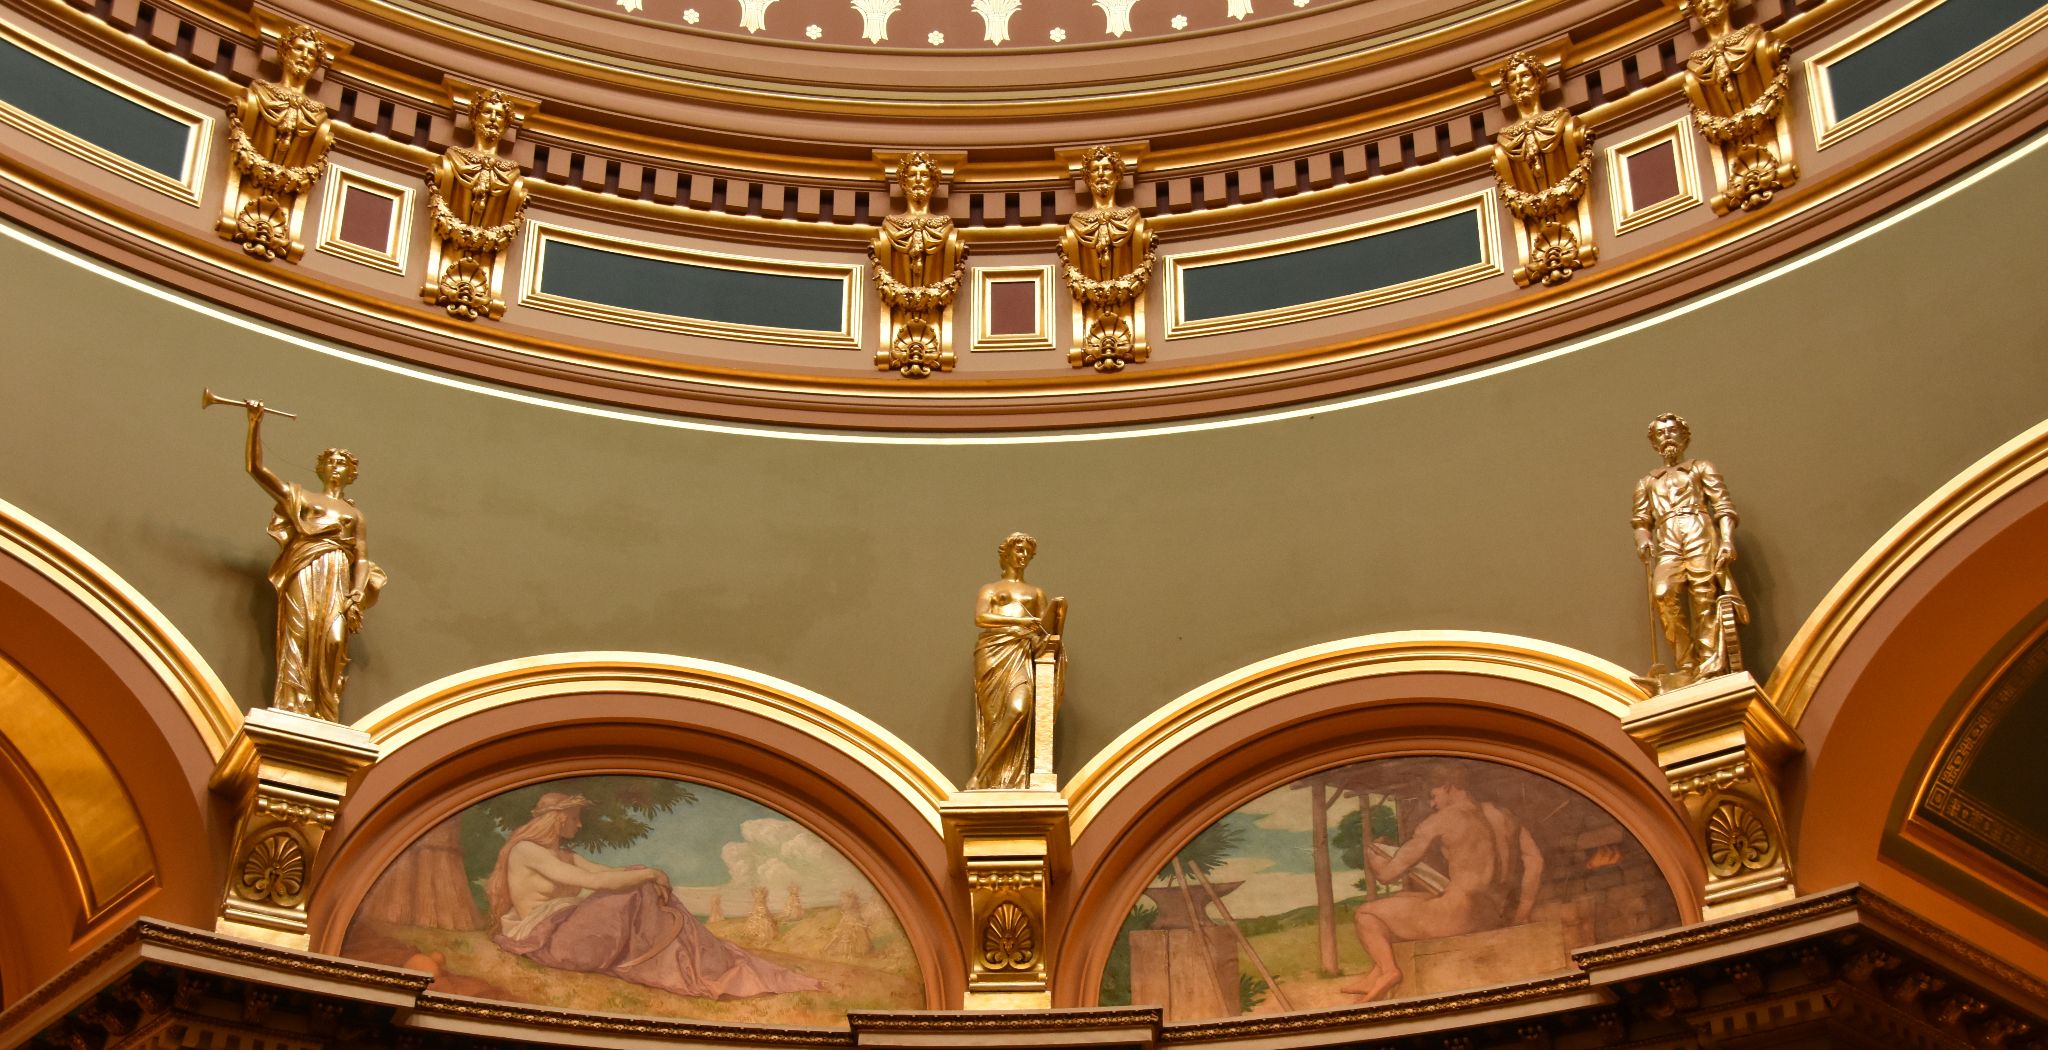 Iowa State Capitol (Second Floor States and Paintings - d), Des Moines, IA - 2016-06-30